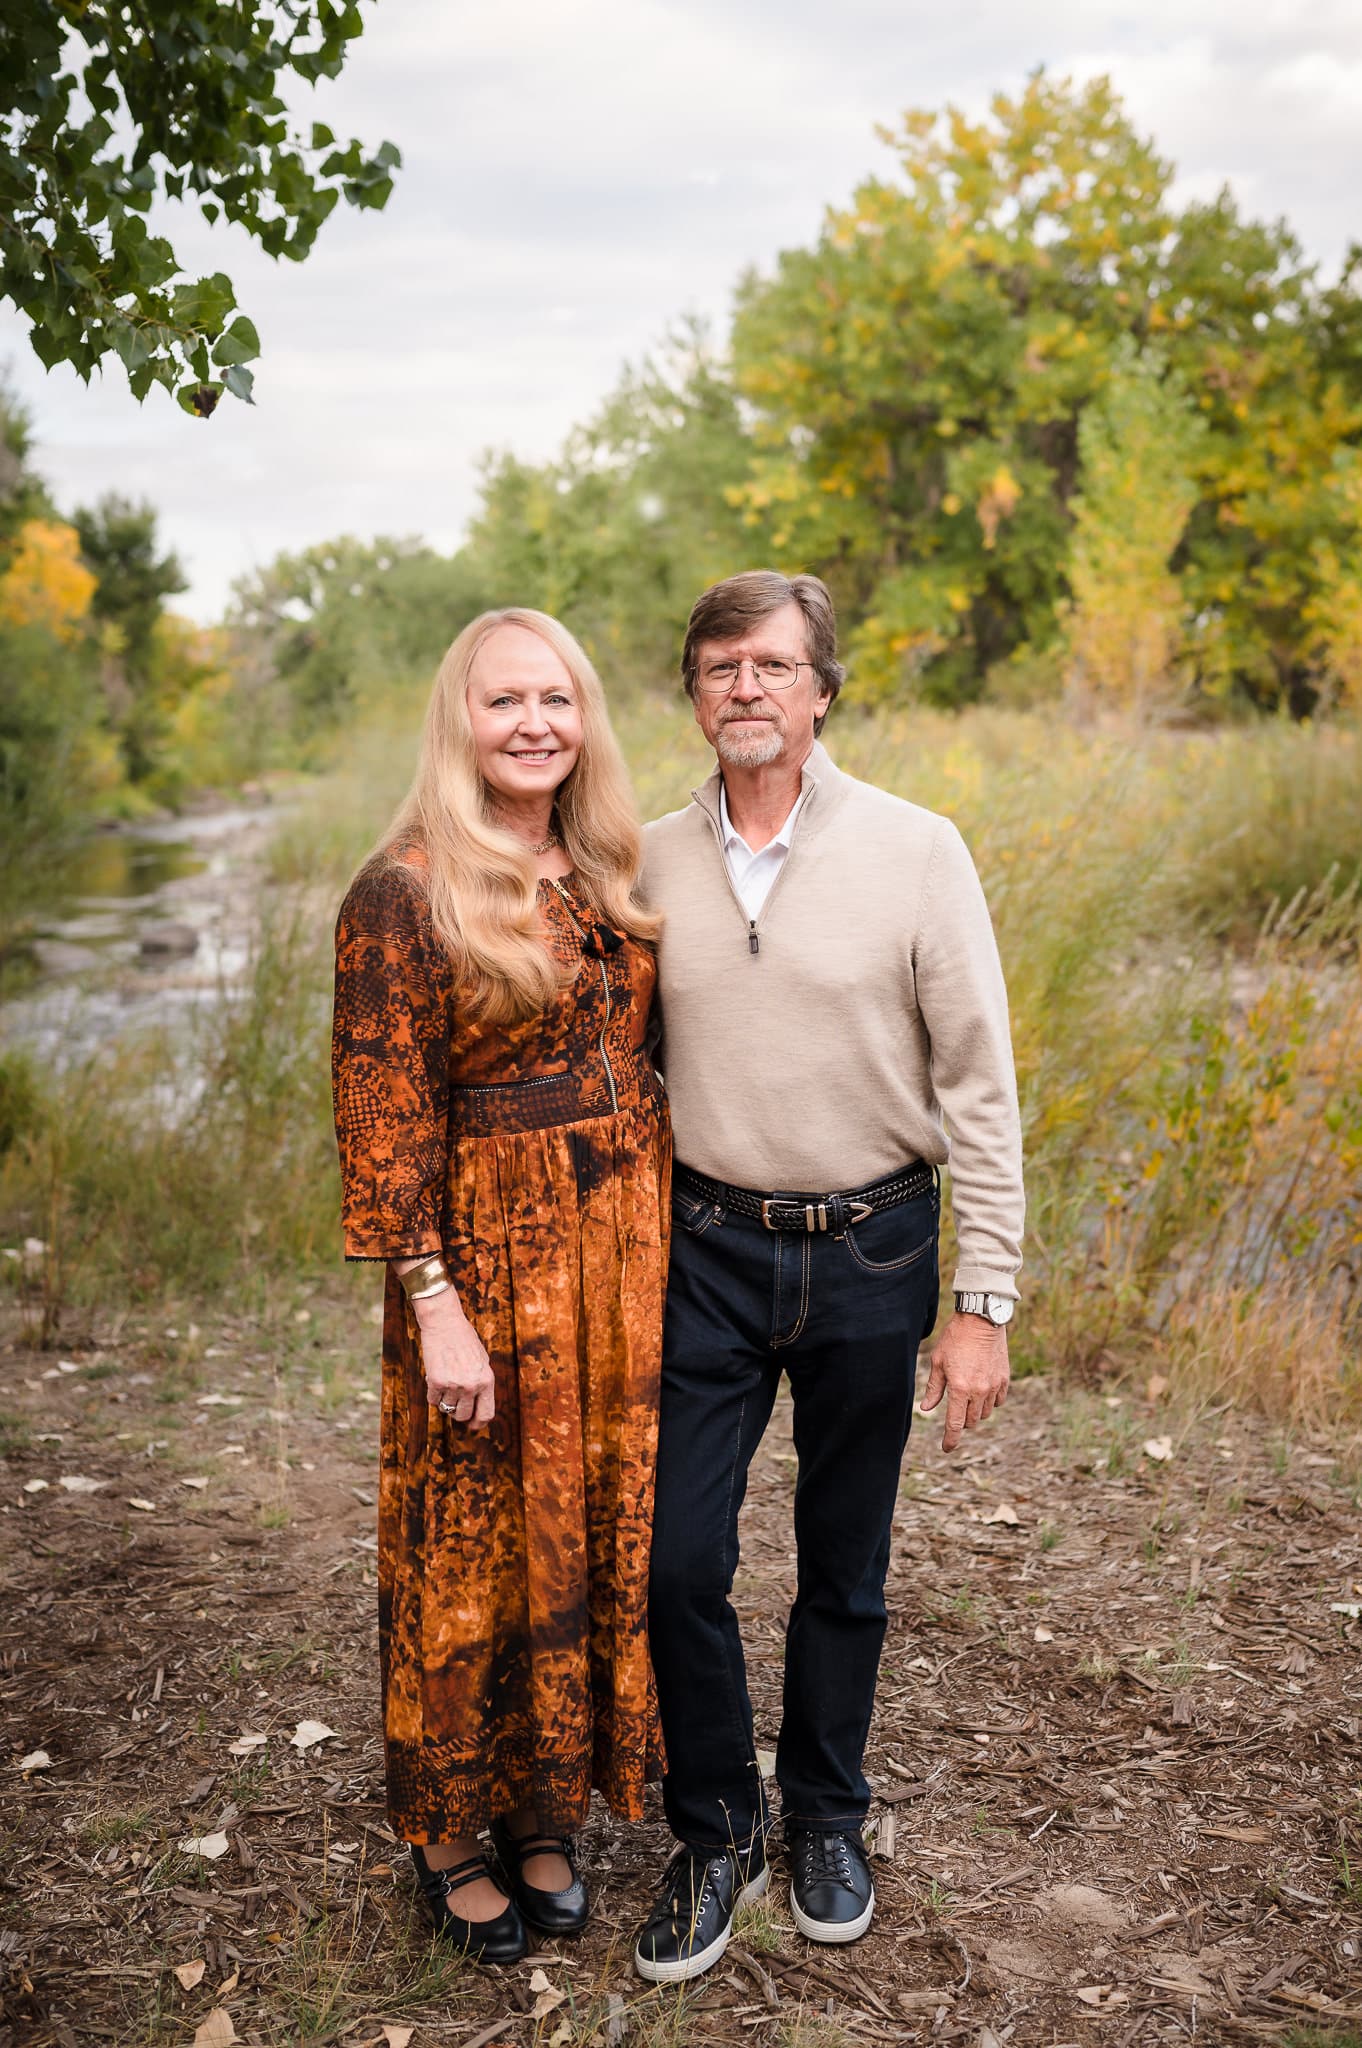 An autumn portrait with changing leaves in the background of a man and woman celebrating their 40th wedding anniversary.